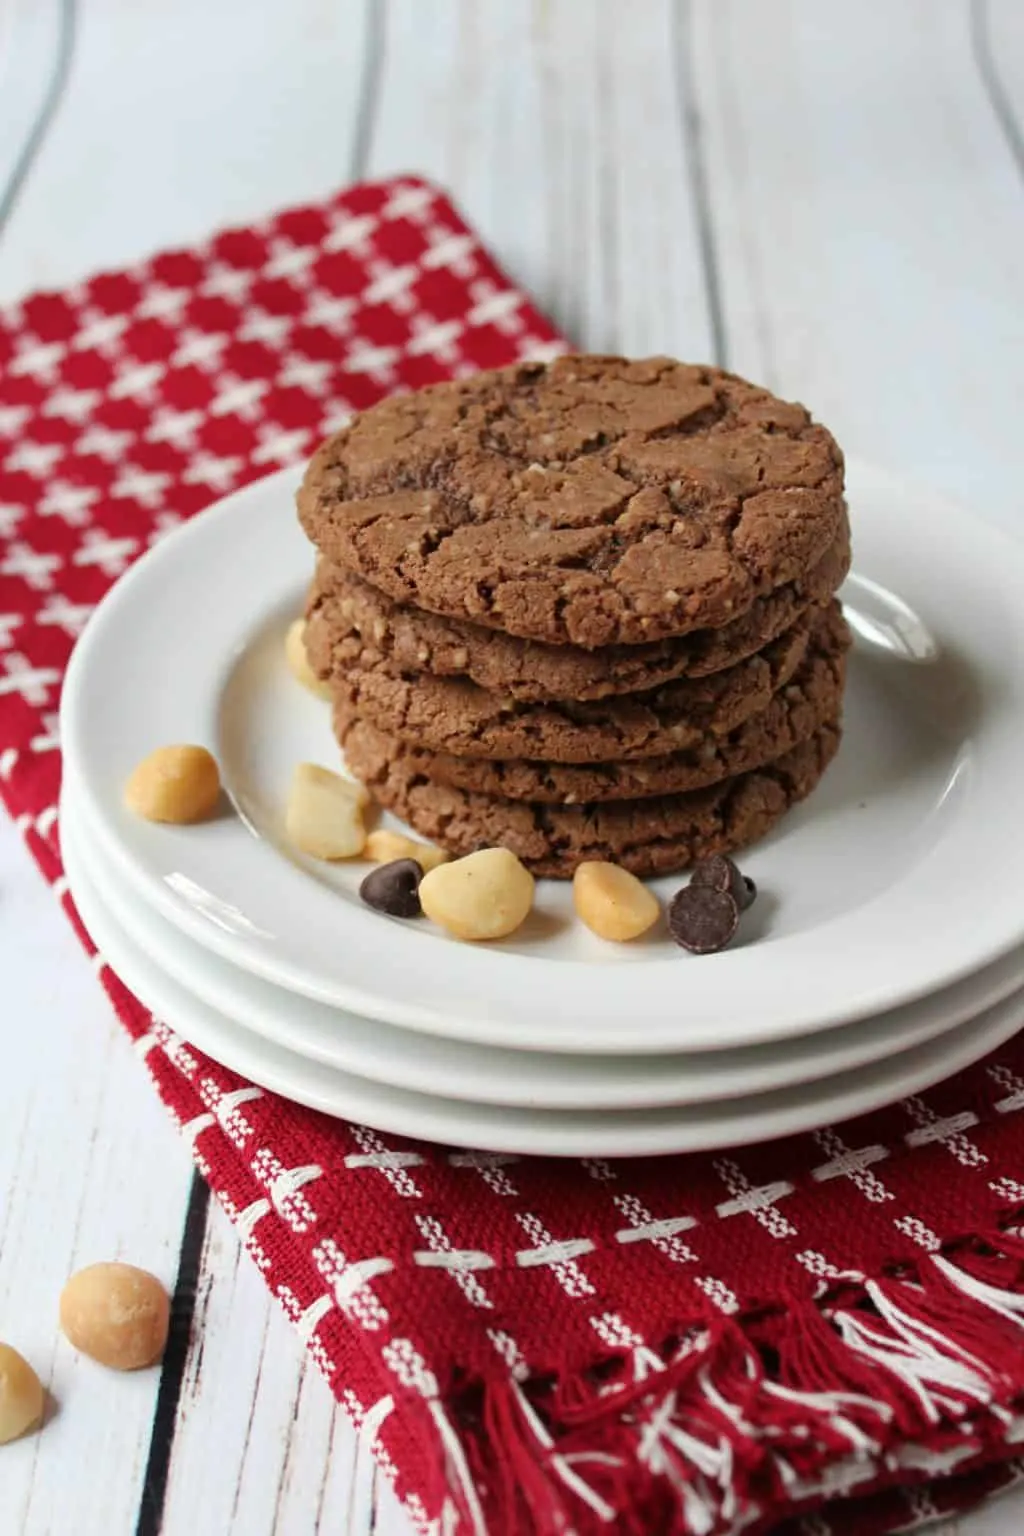 Tall stack of chocolate cookies on white plate with macadamia nuts and chocolate